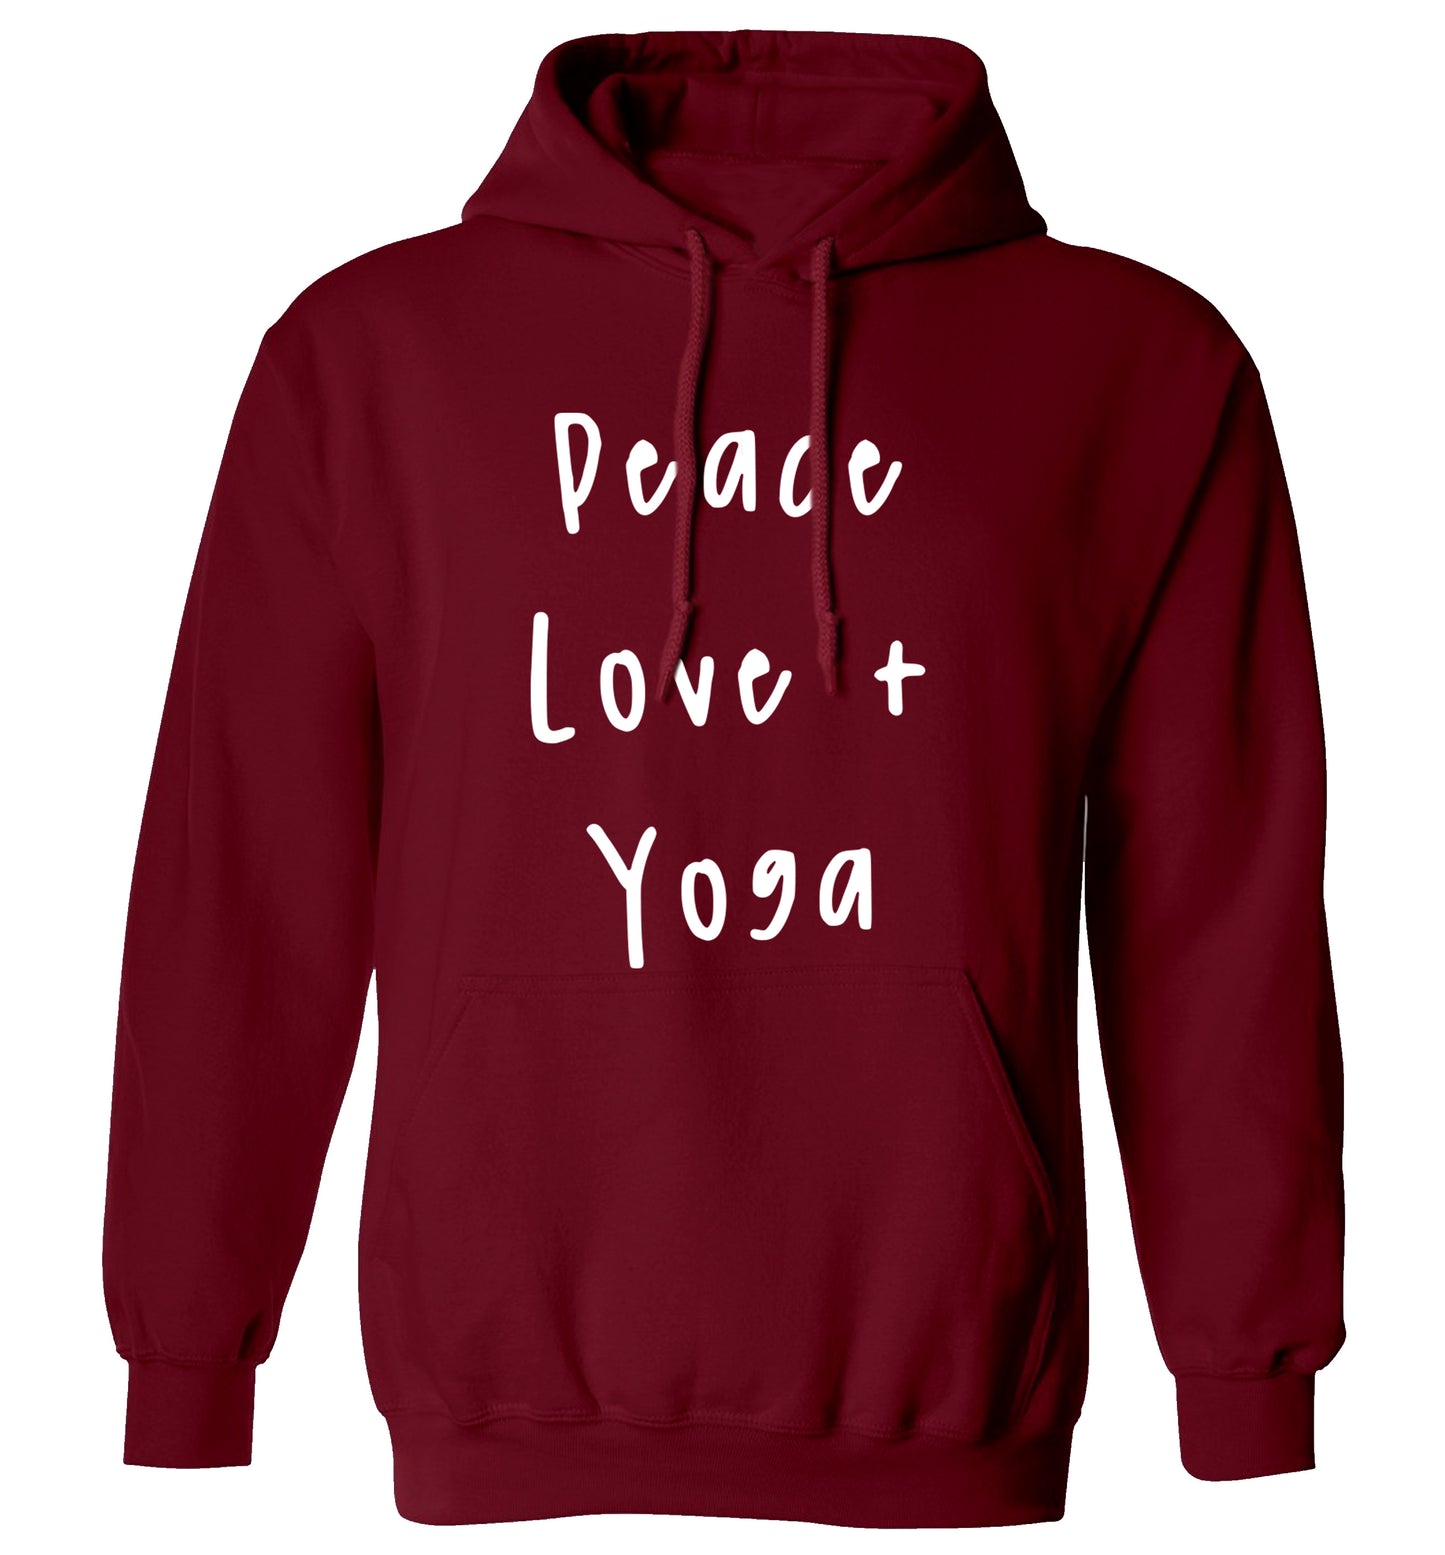 Peace love and yoga adults unisex maroon hoodie 2XL